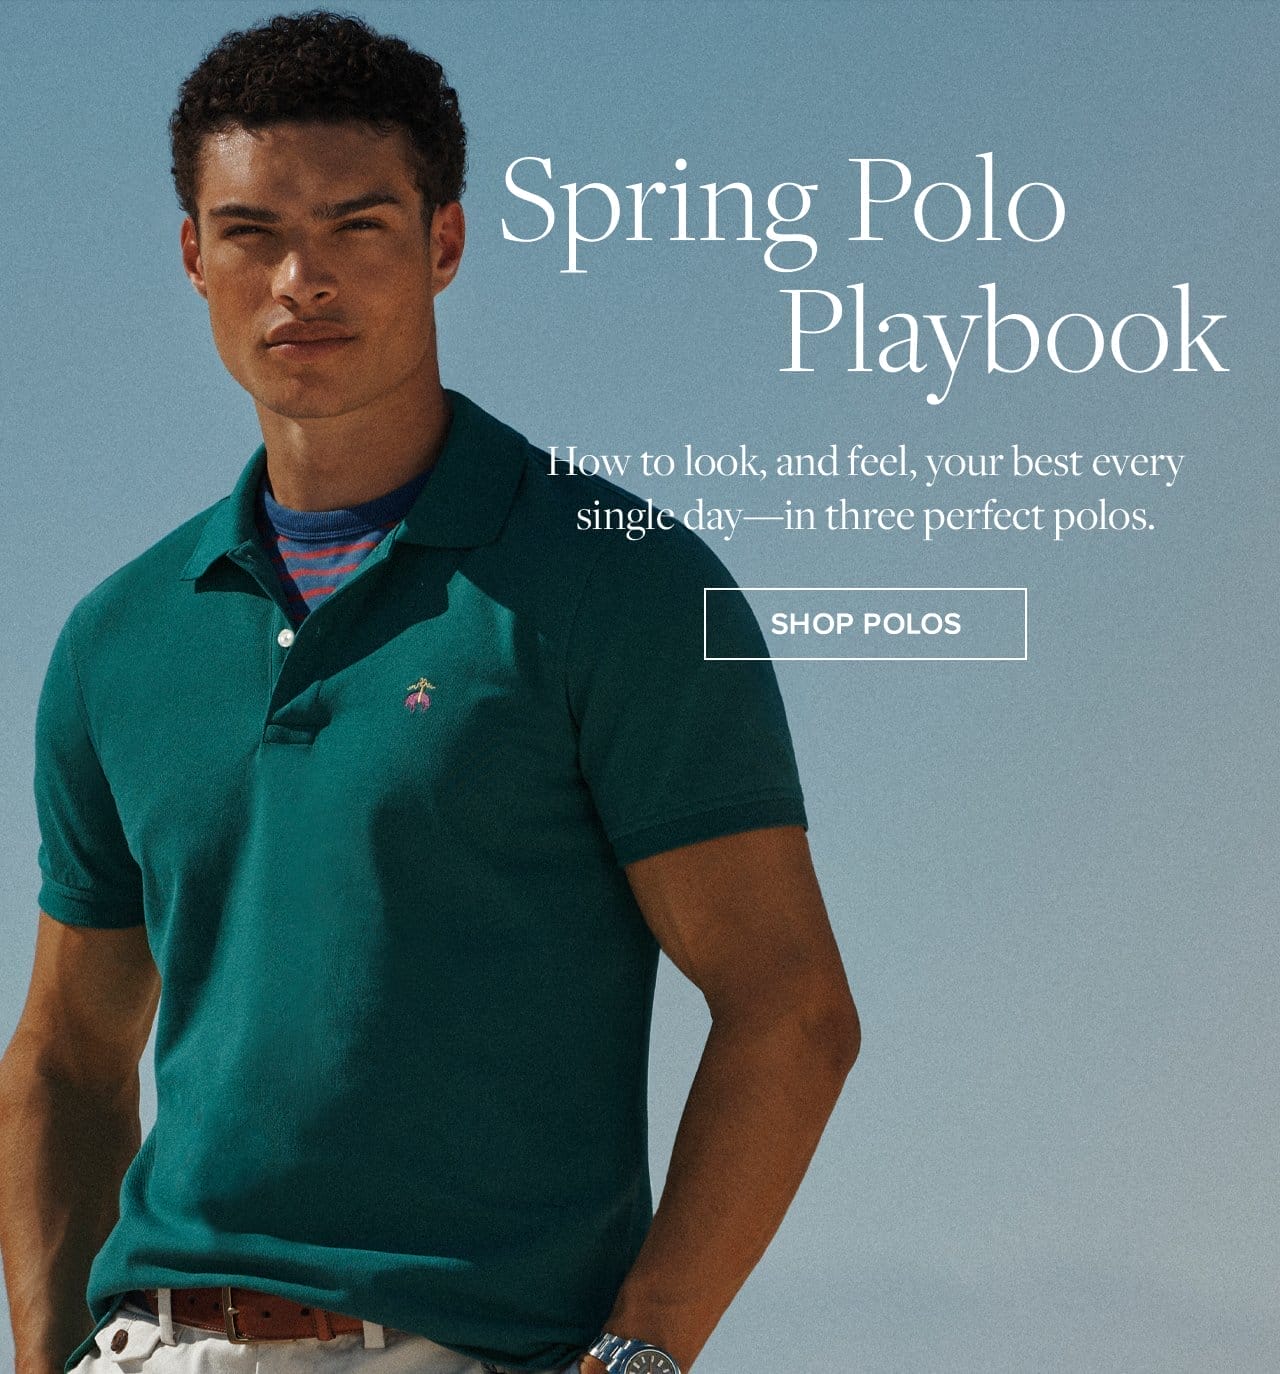 Spring Polo Playbook How to look, and feel, your best every single day - in three perfect polos. Shop Polos